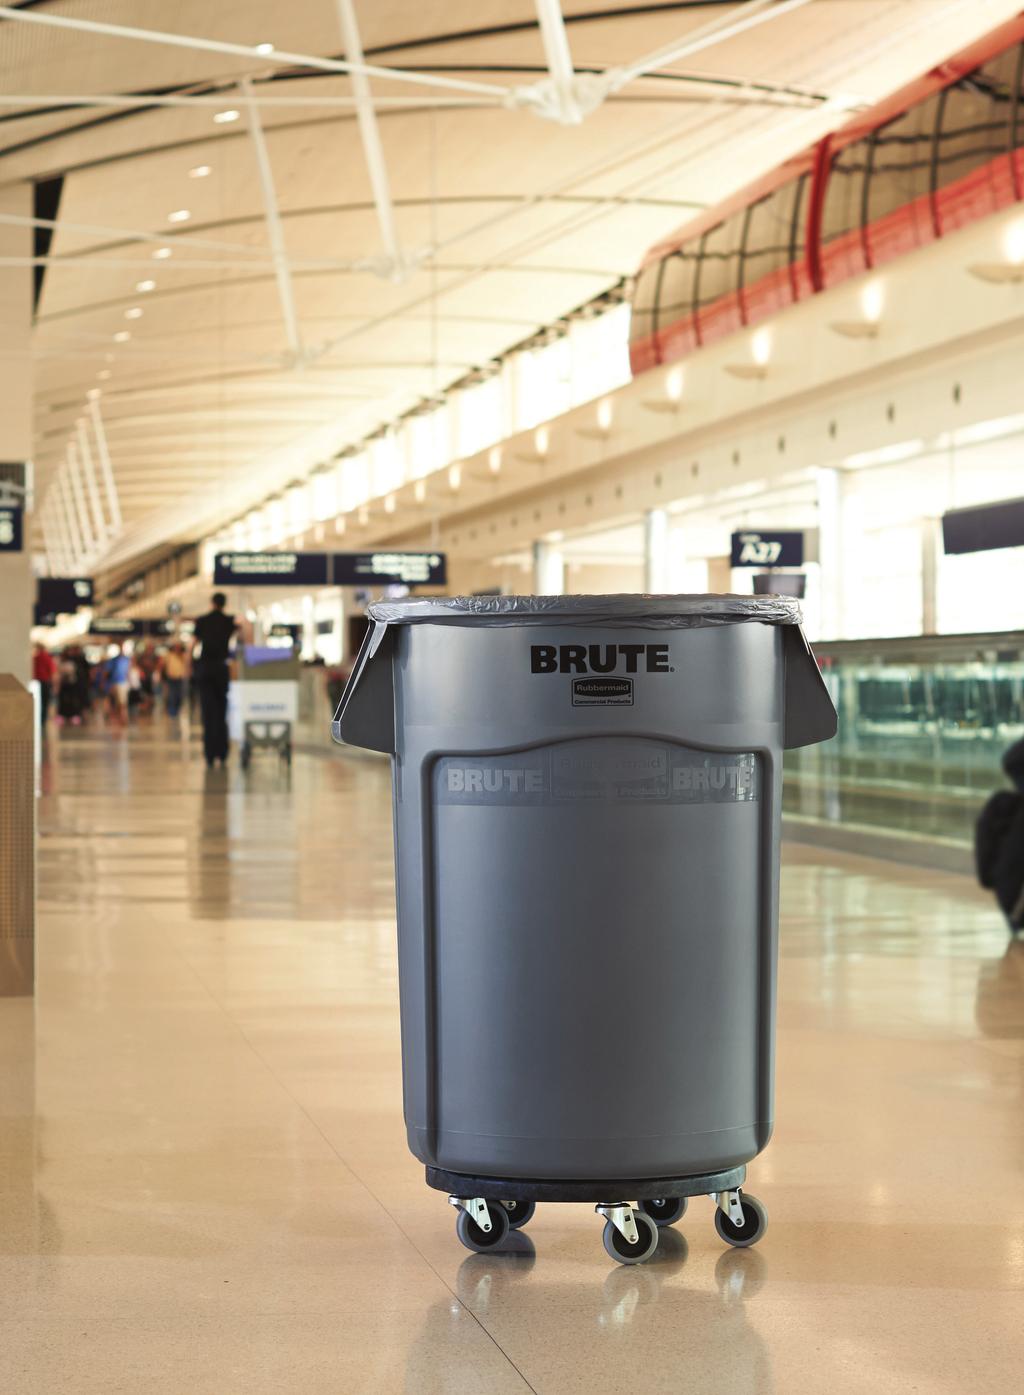 SINCE 1968, BRUTE CONTAINERS have been trusted by professionals for their iconic durability and reliability.